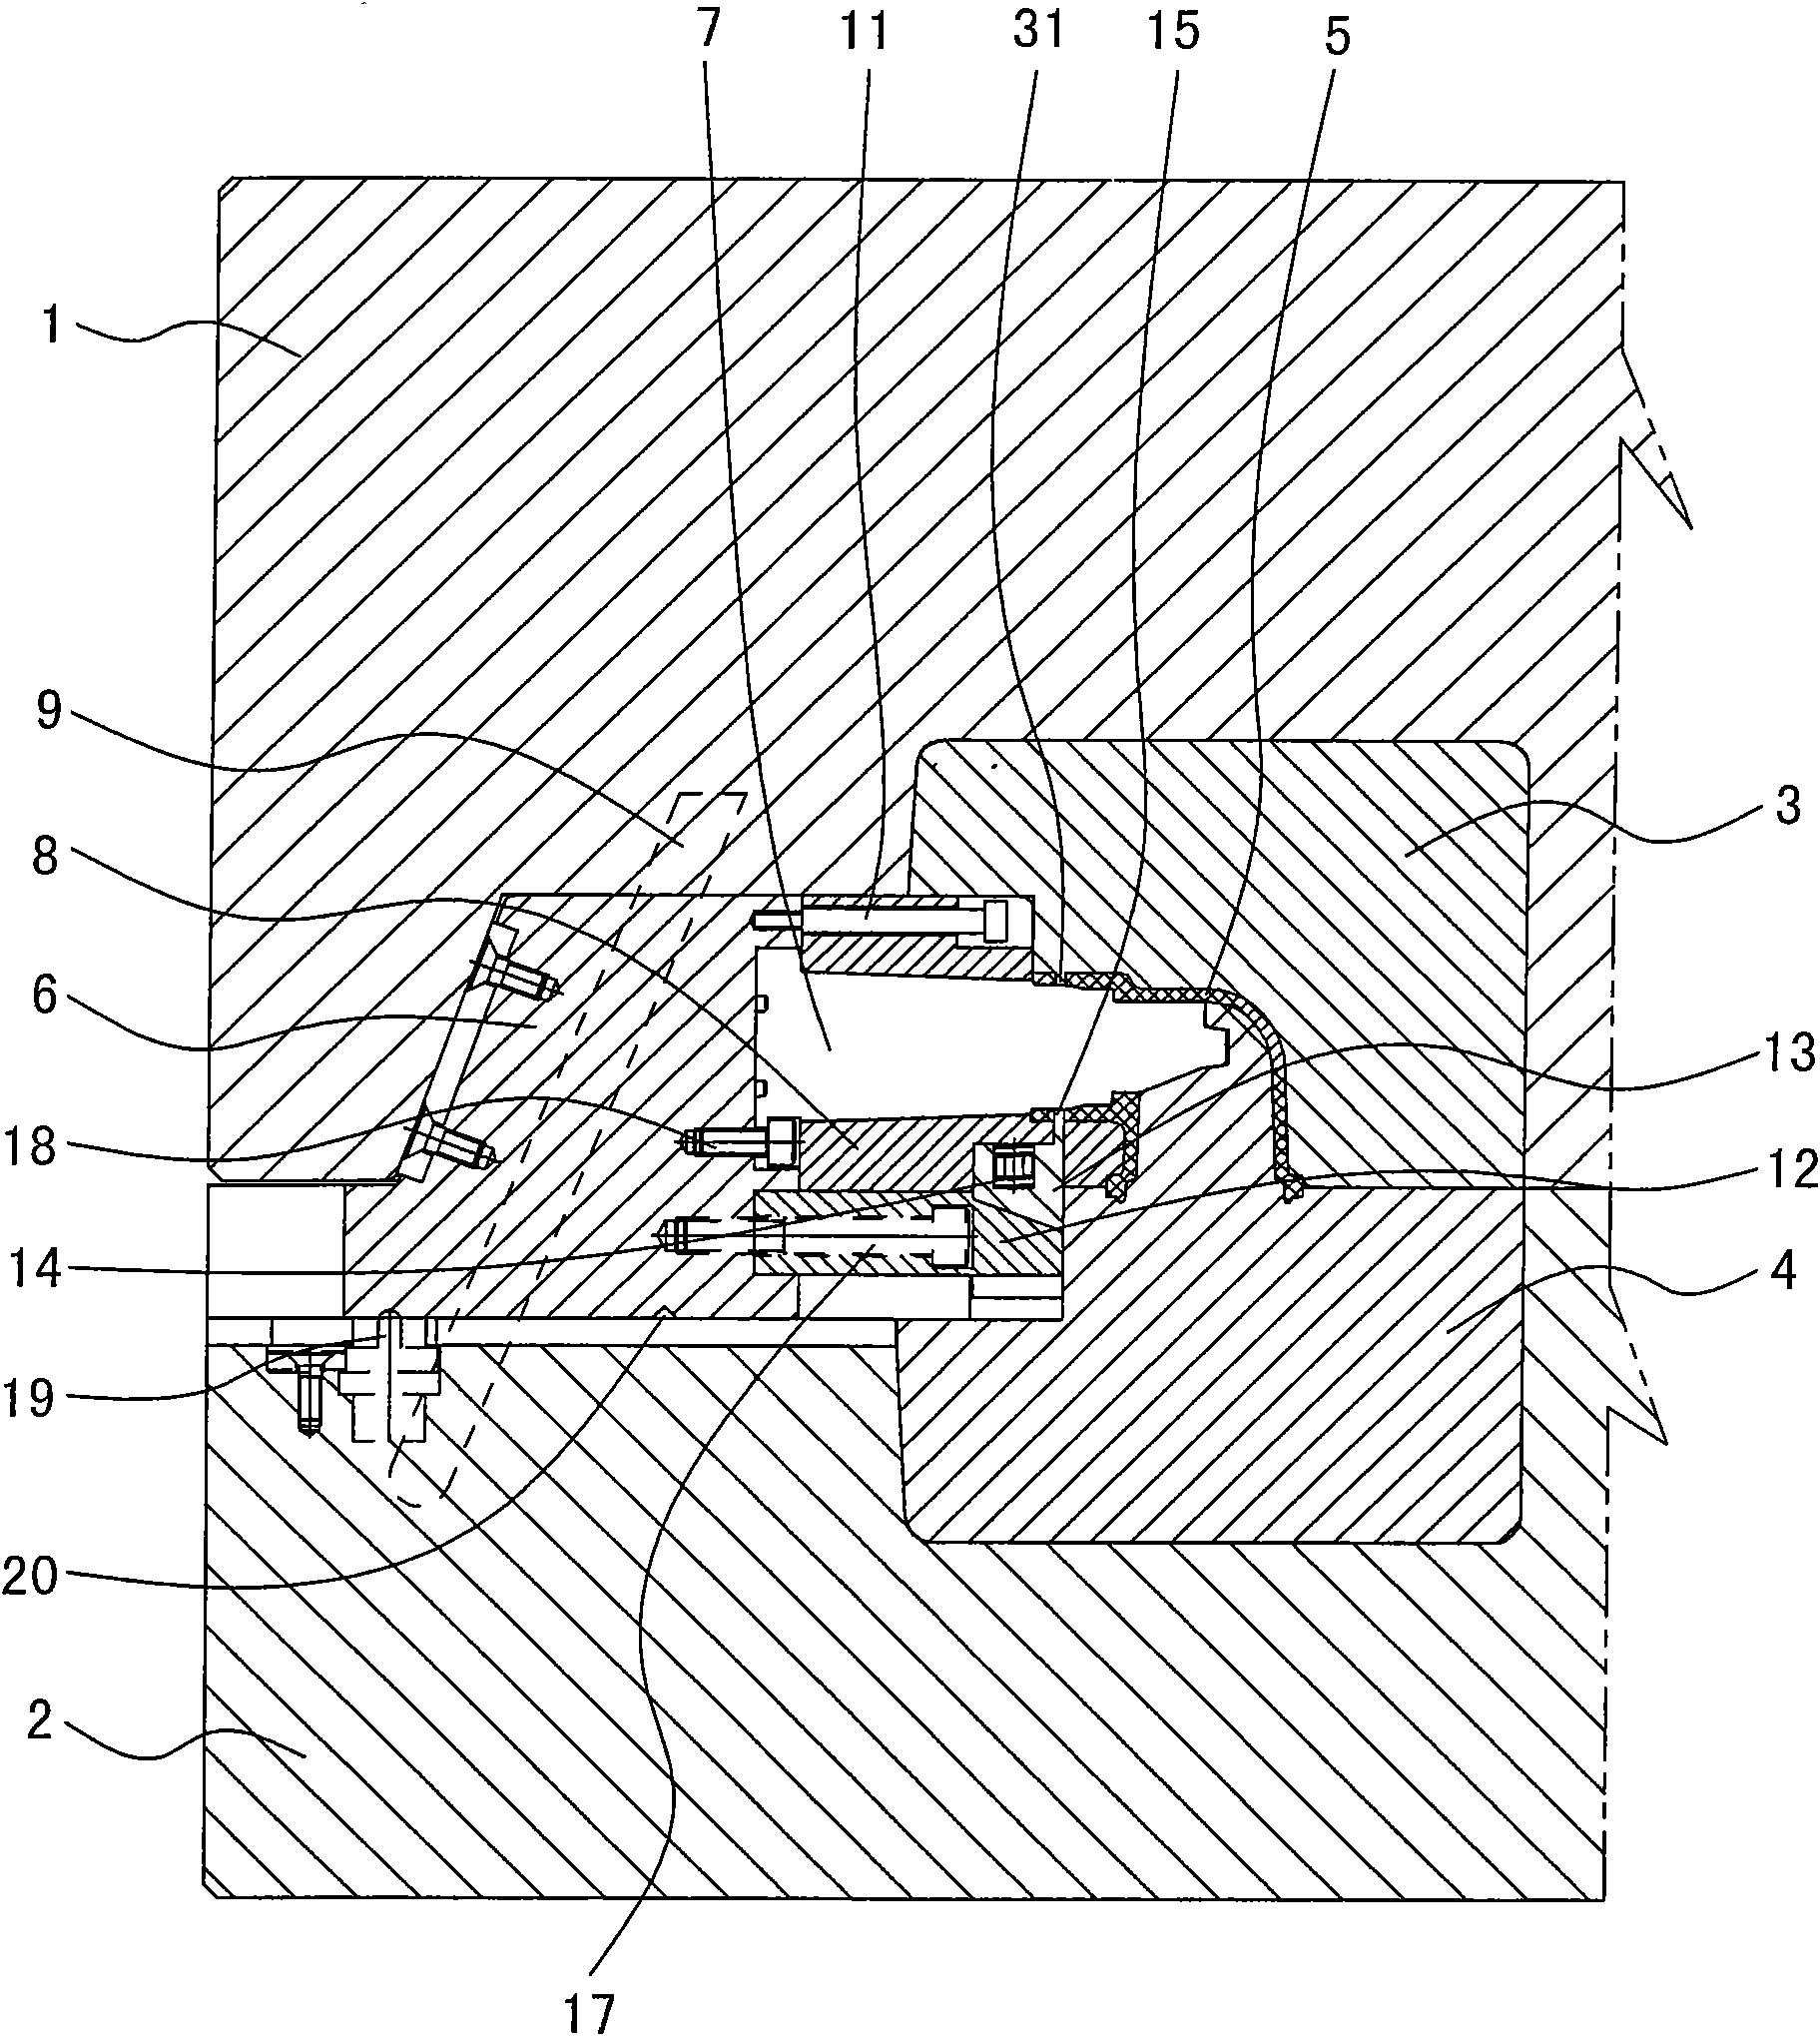 Secondary composite core pulling mechanism for automotive water tank